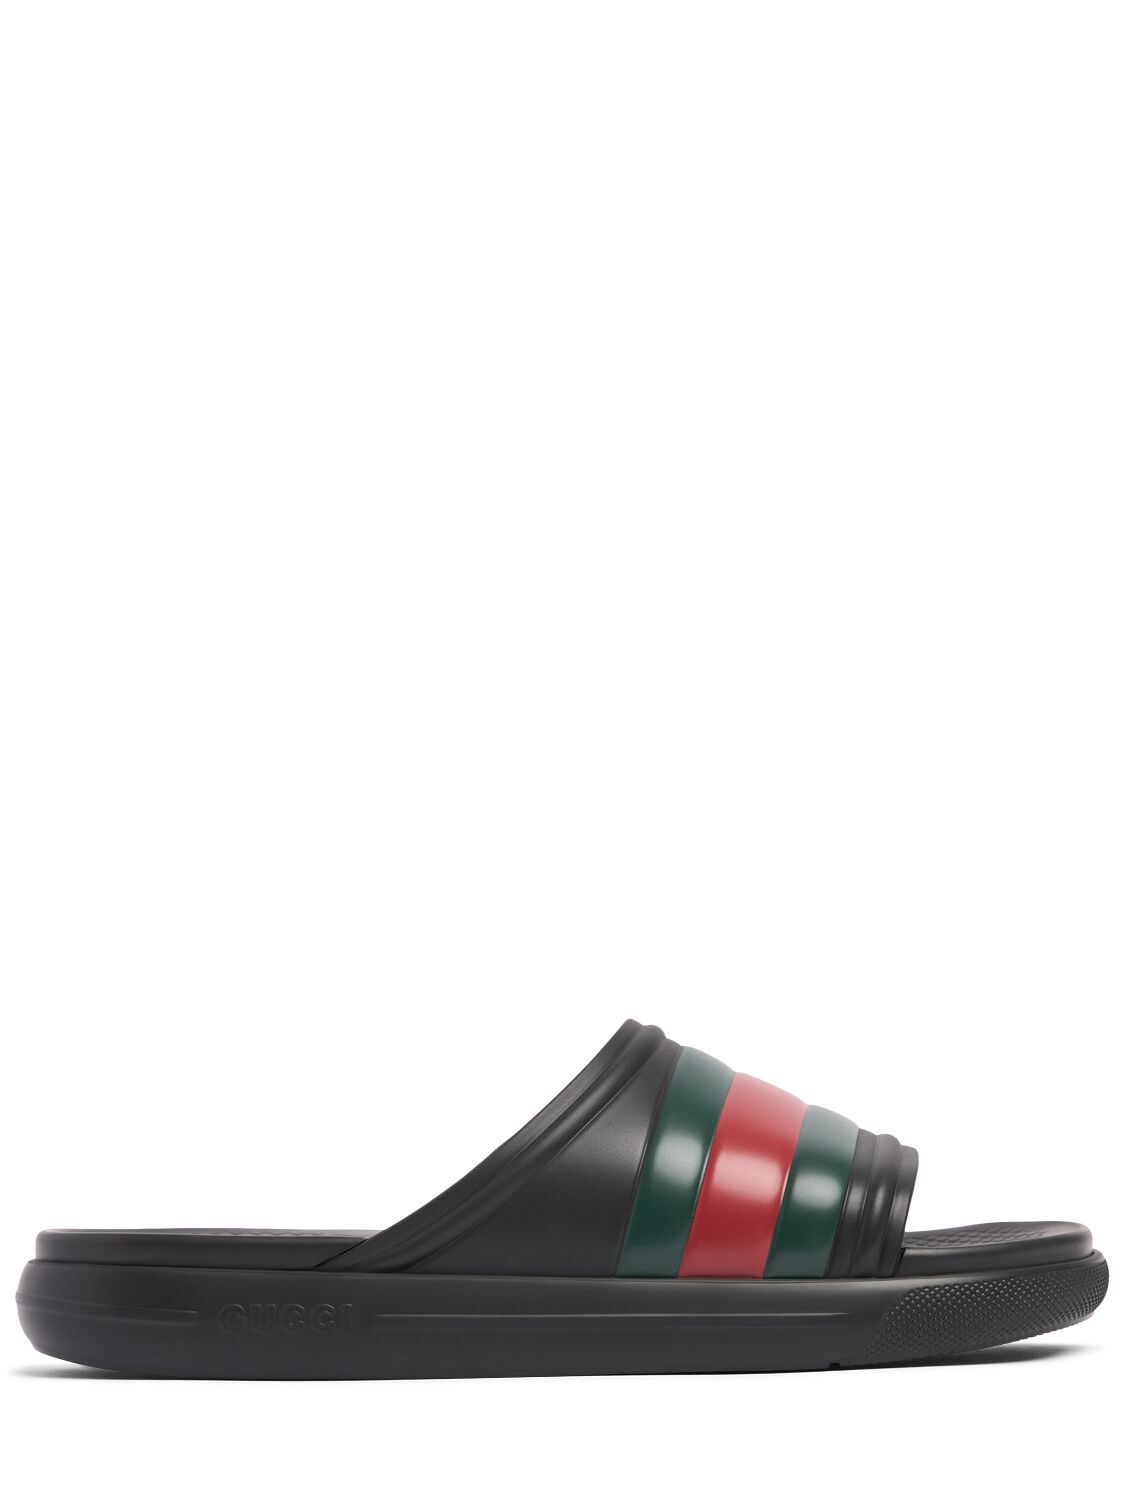 Gucci Ace Rubber Slides In Black,green,red